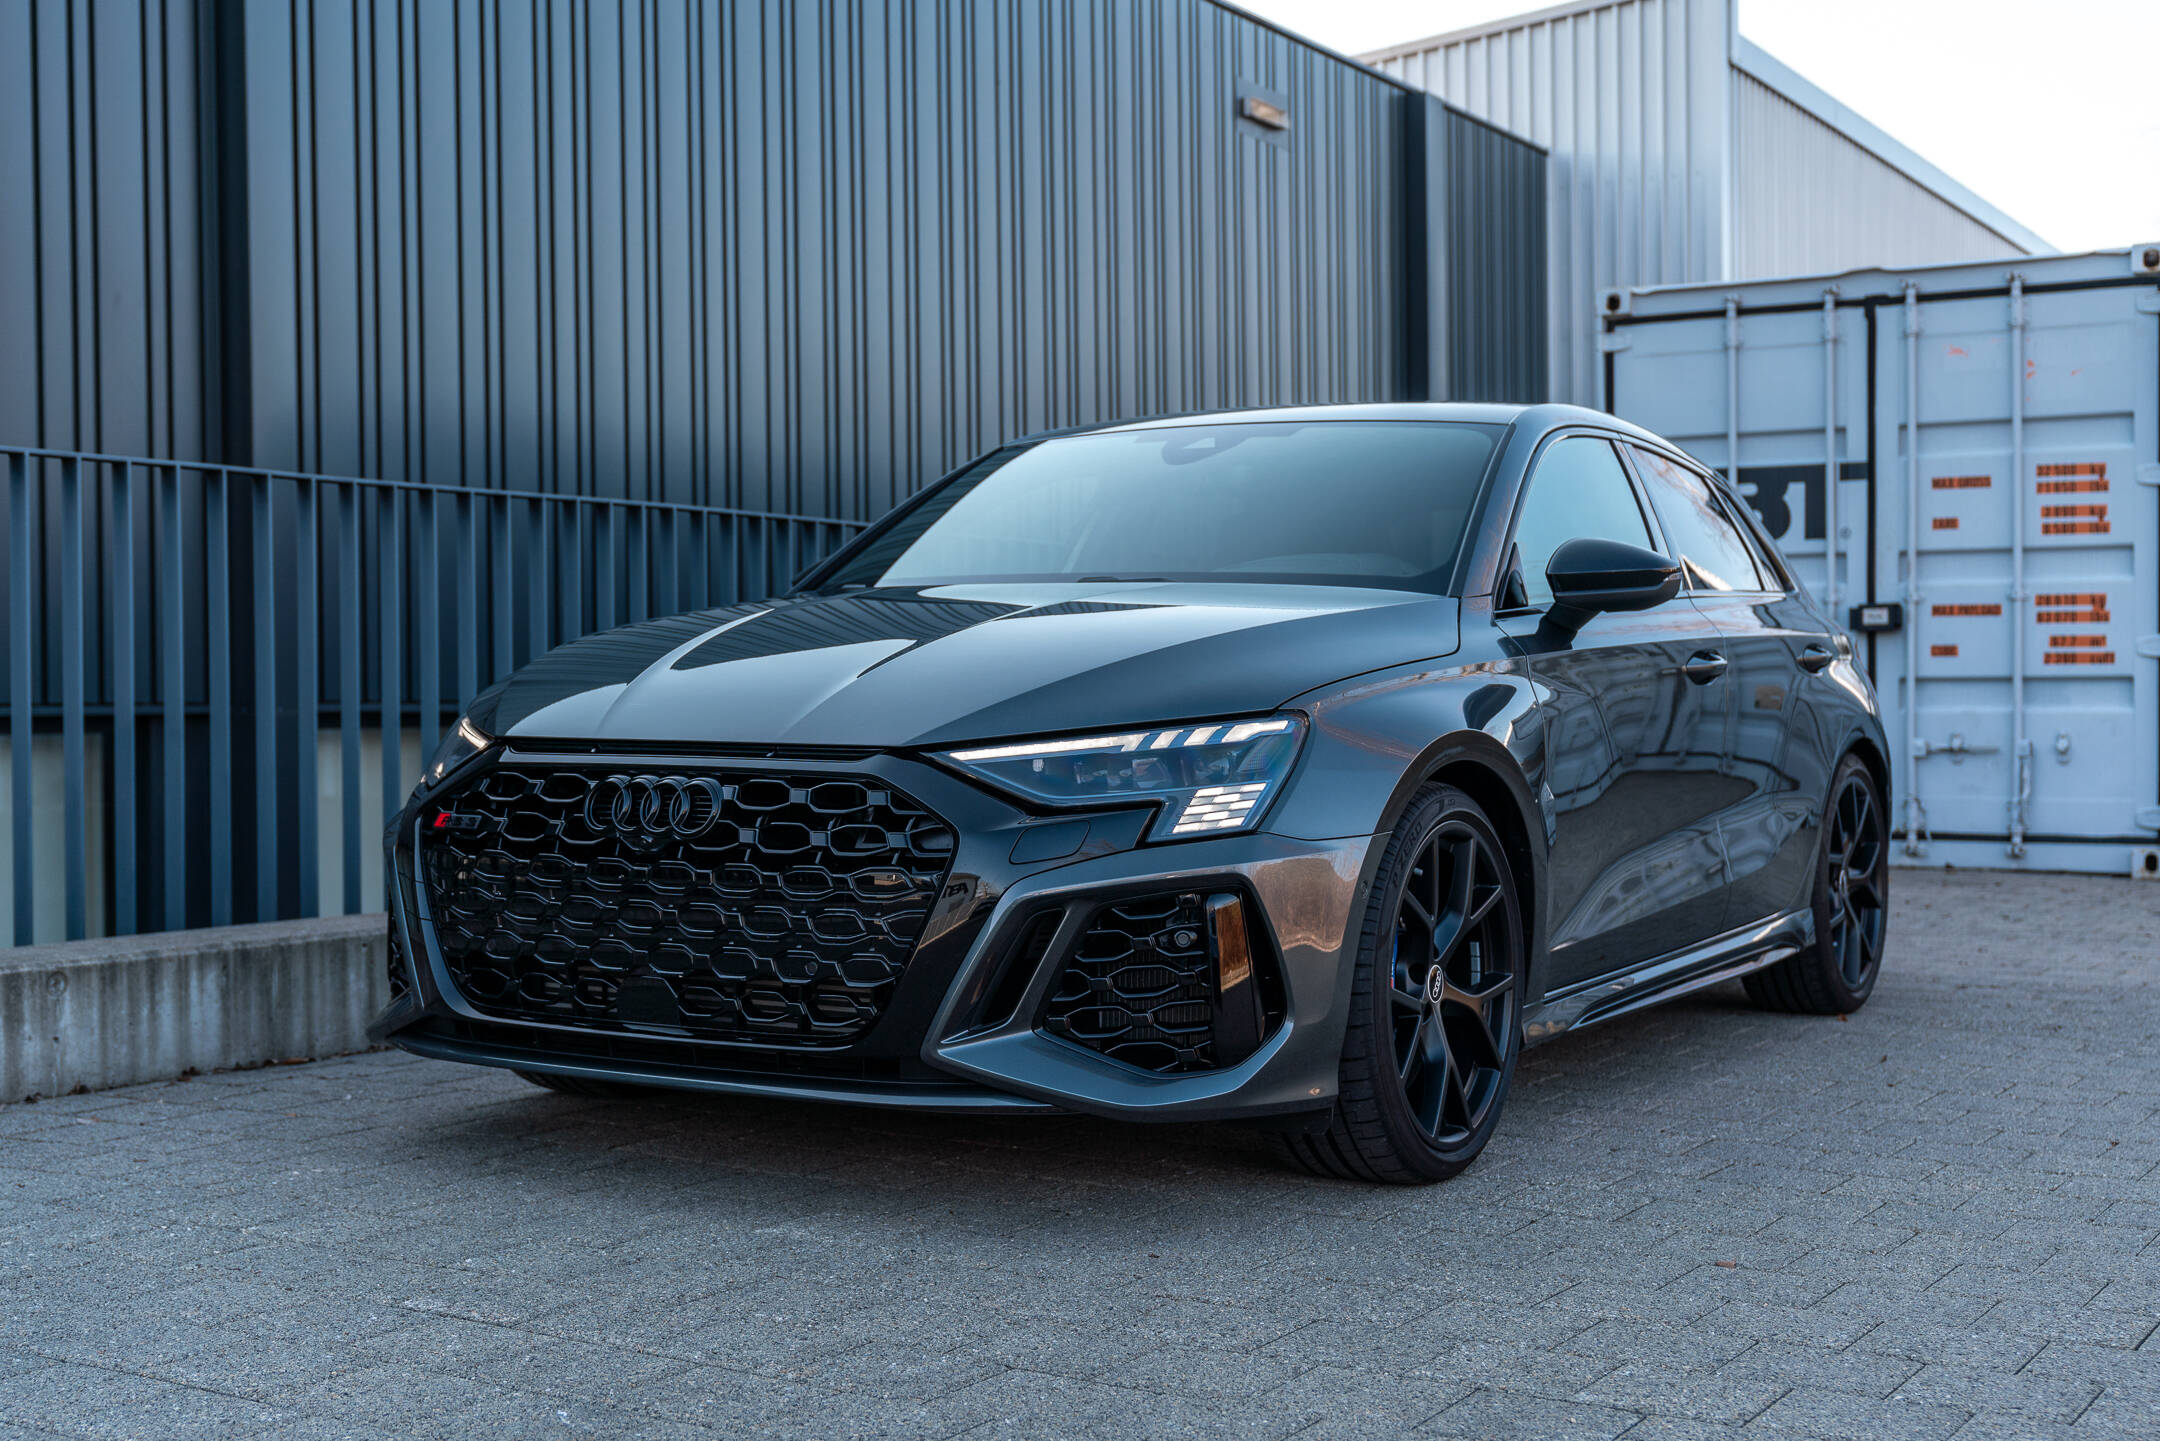 ABT aerodynamic and interior upgrades for 2023 Audi Q8 and SQ8 - Audi  Tuning, VW Tuning, Chiptuning von ABT Sportsline.